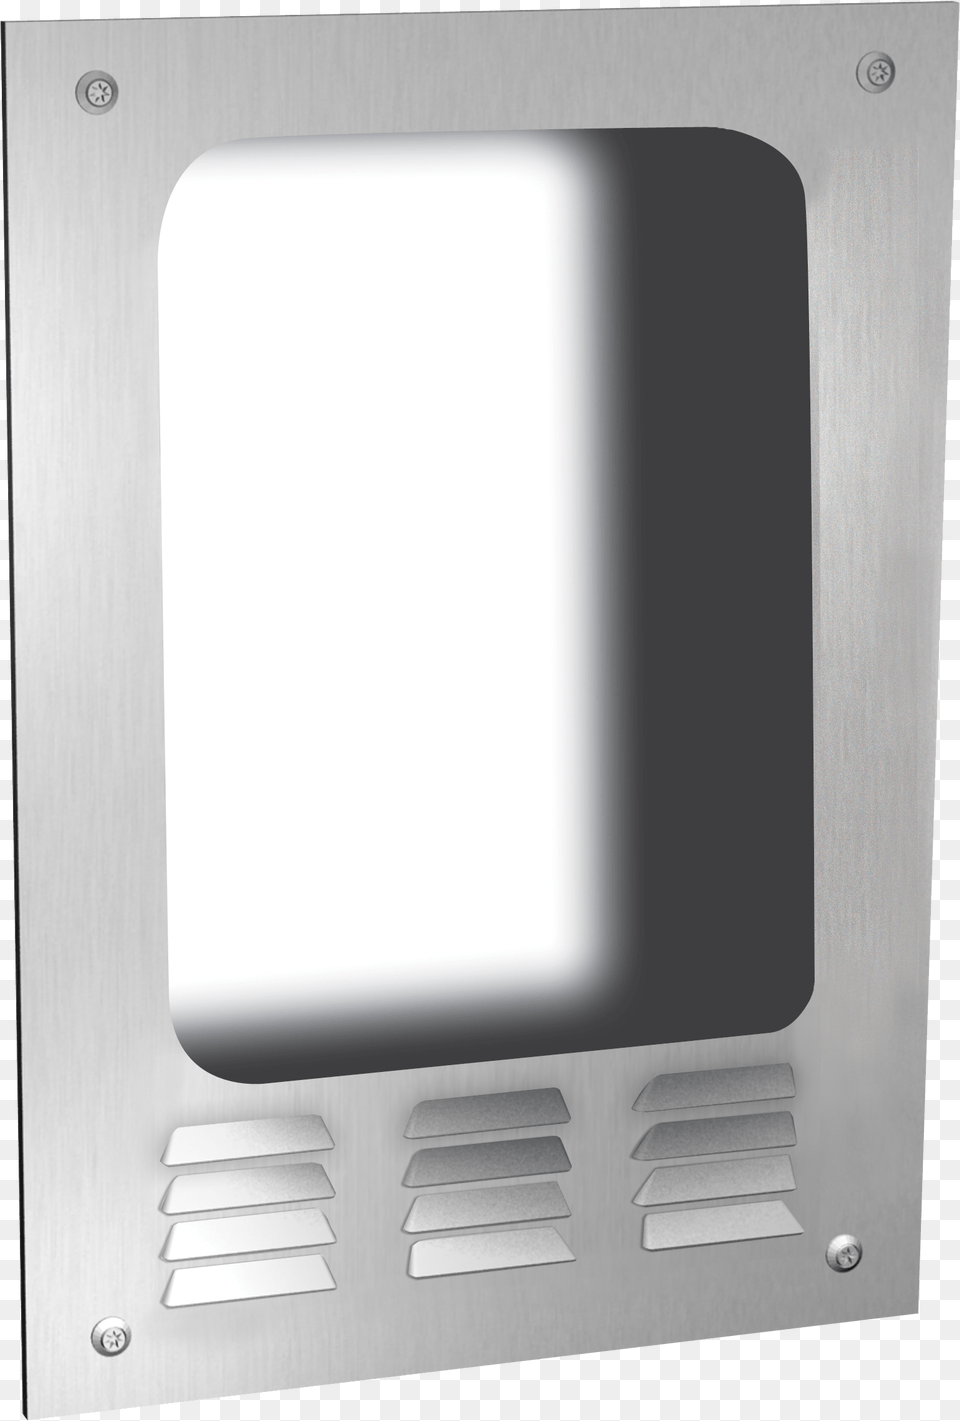 Leviton Dryer Wall Plate Range And Tumble Vent Television Set, Lighting, Mirror, Mailbox Free Transparent Png